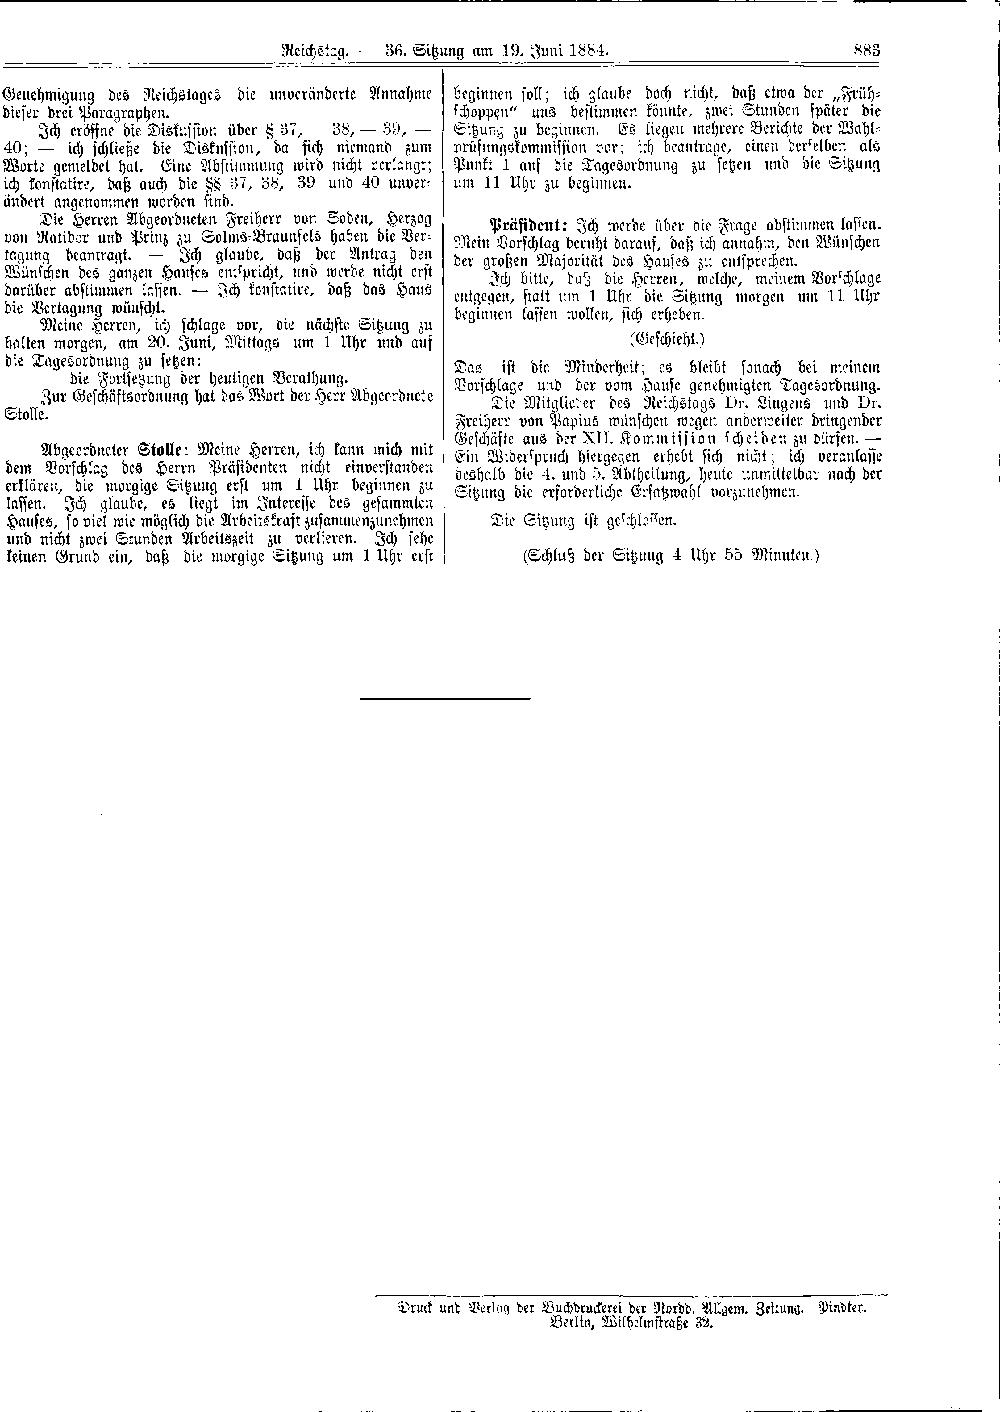 Scan of page 883